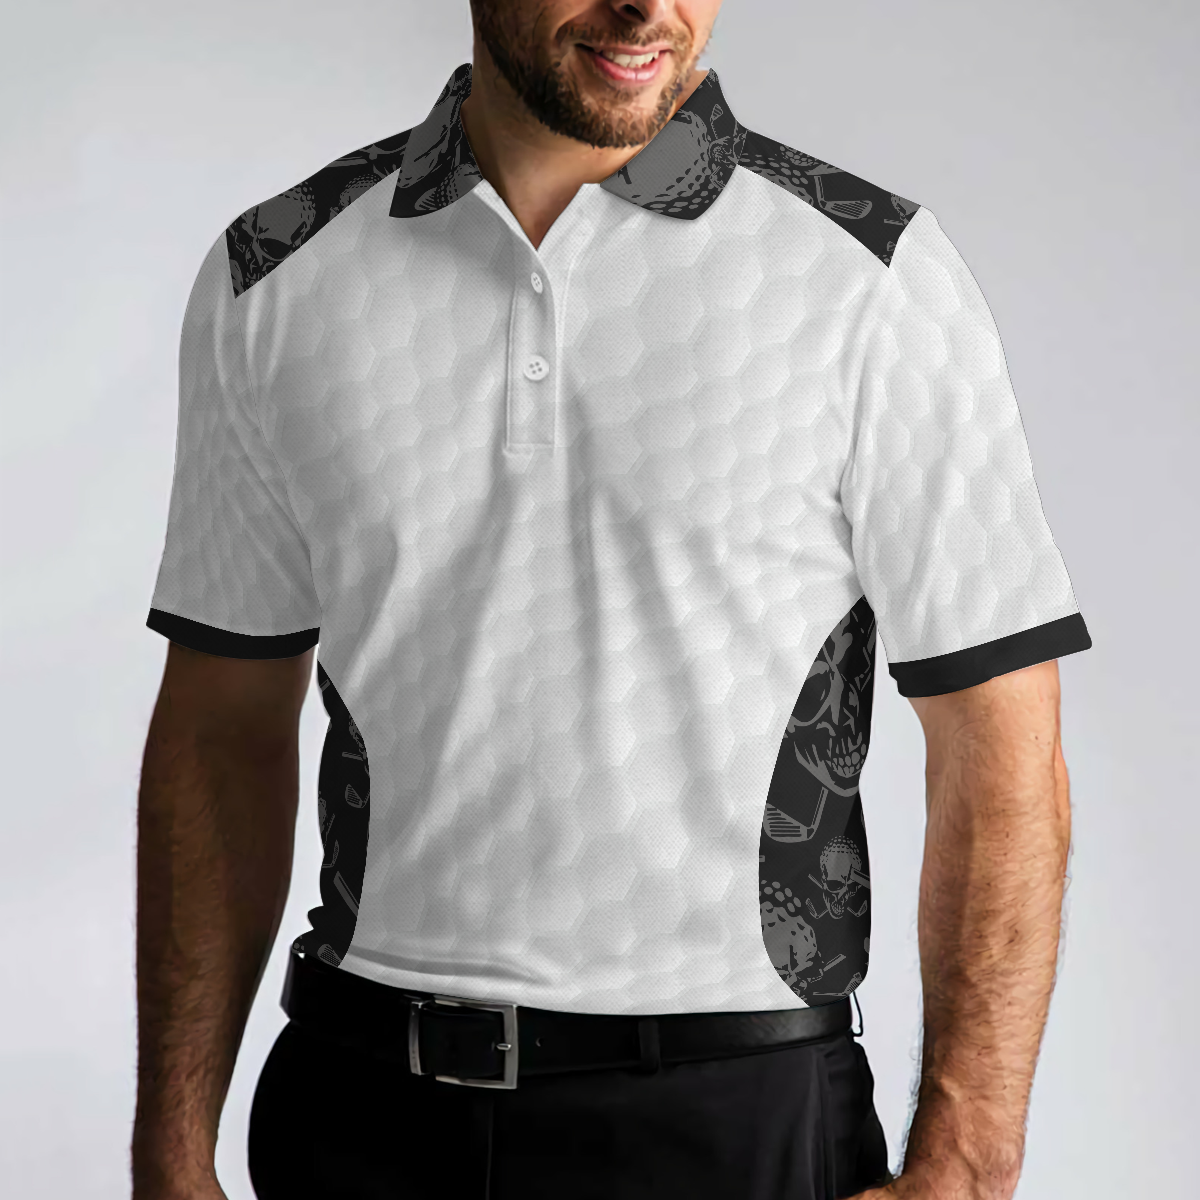 Grip It Rip It Sip It Golf White Polo Shirt Skull Pattern Shirt For Christmas Scary Gift Idea For Golfers - 4